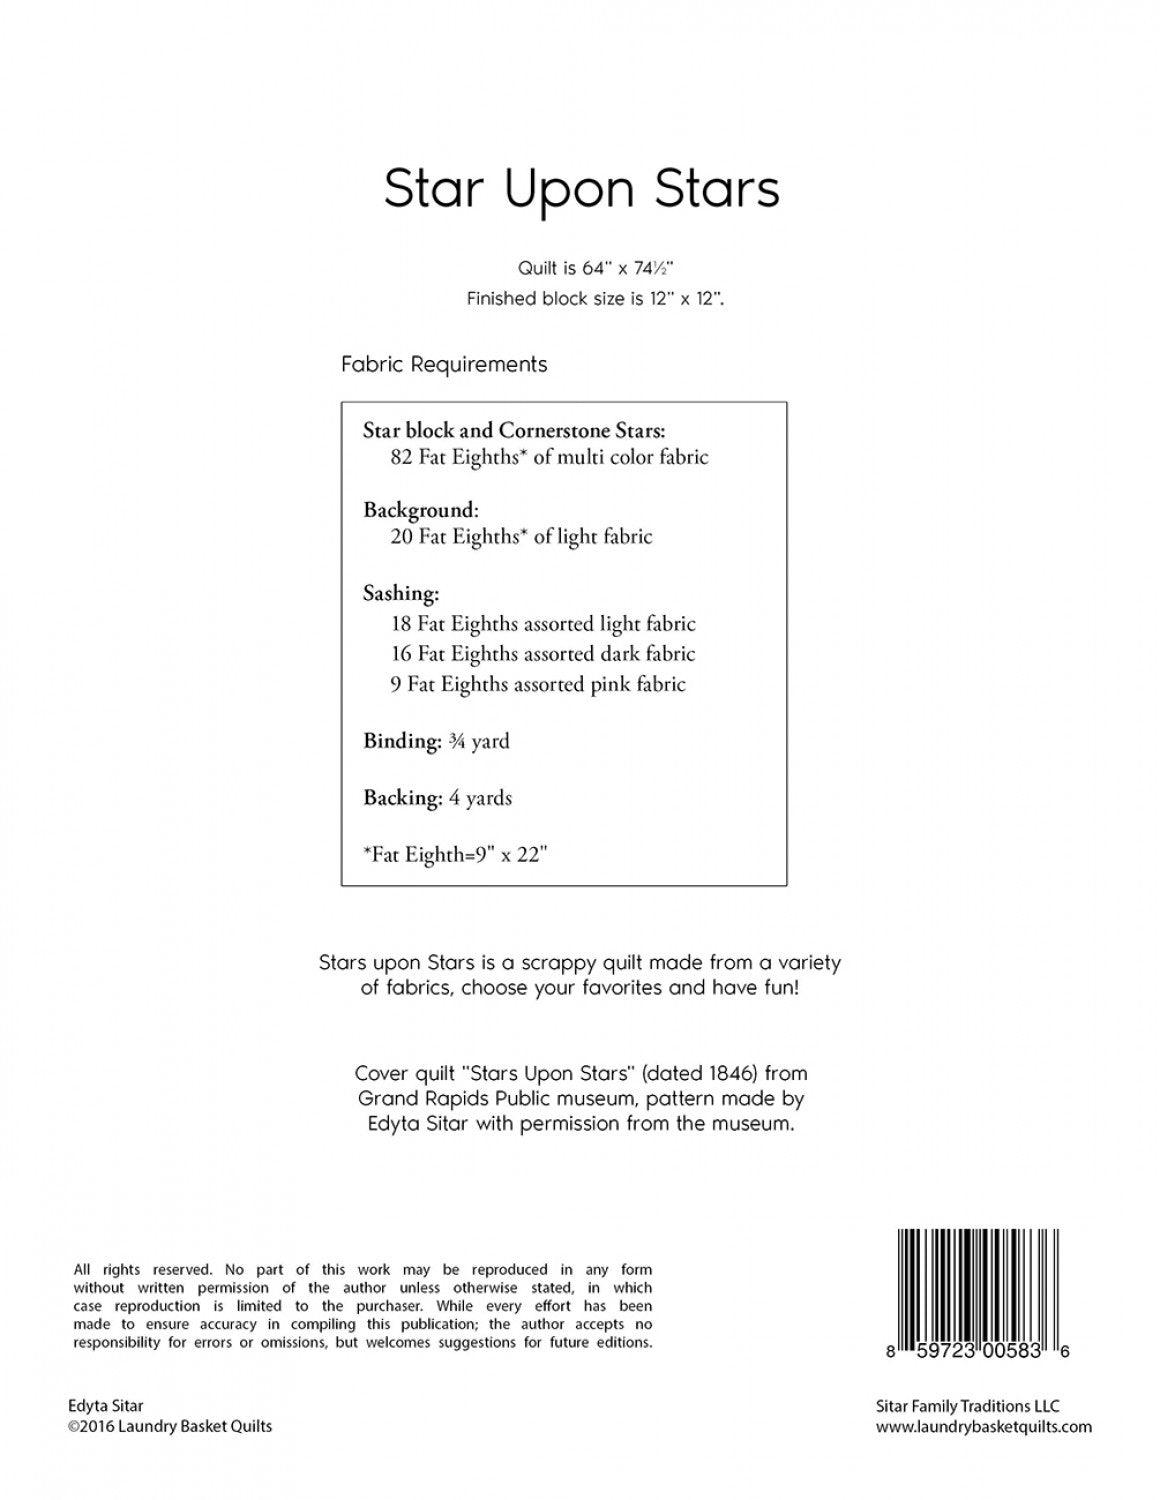 Star Upon Star Quilt Pattern by Edyta Sitar of Laundry Basket Quilts